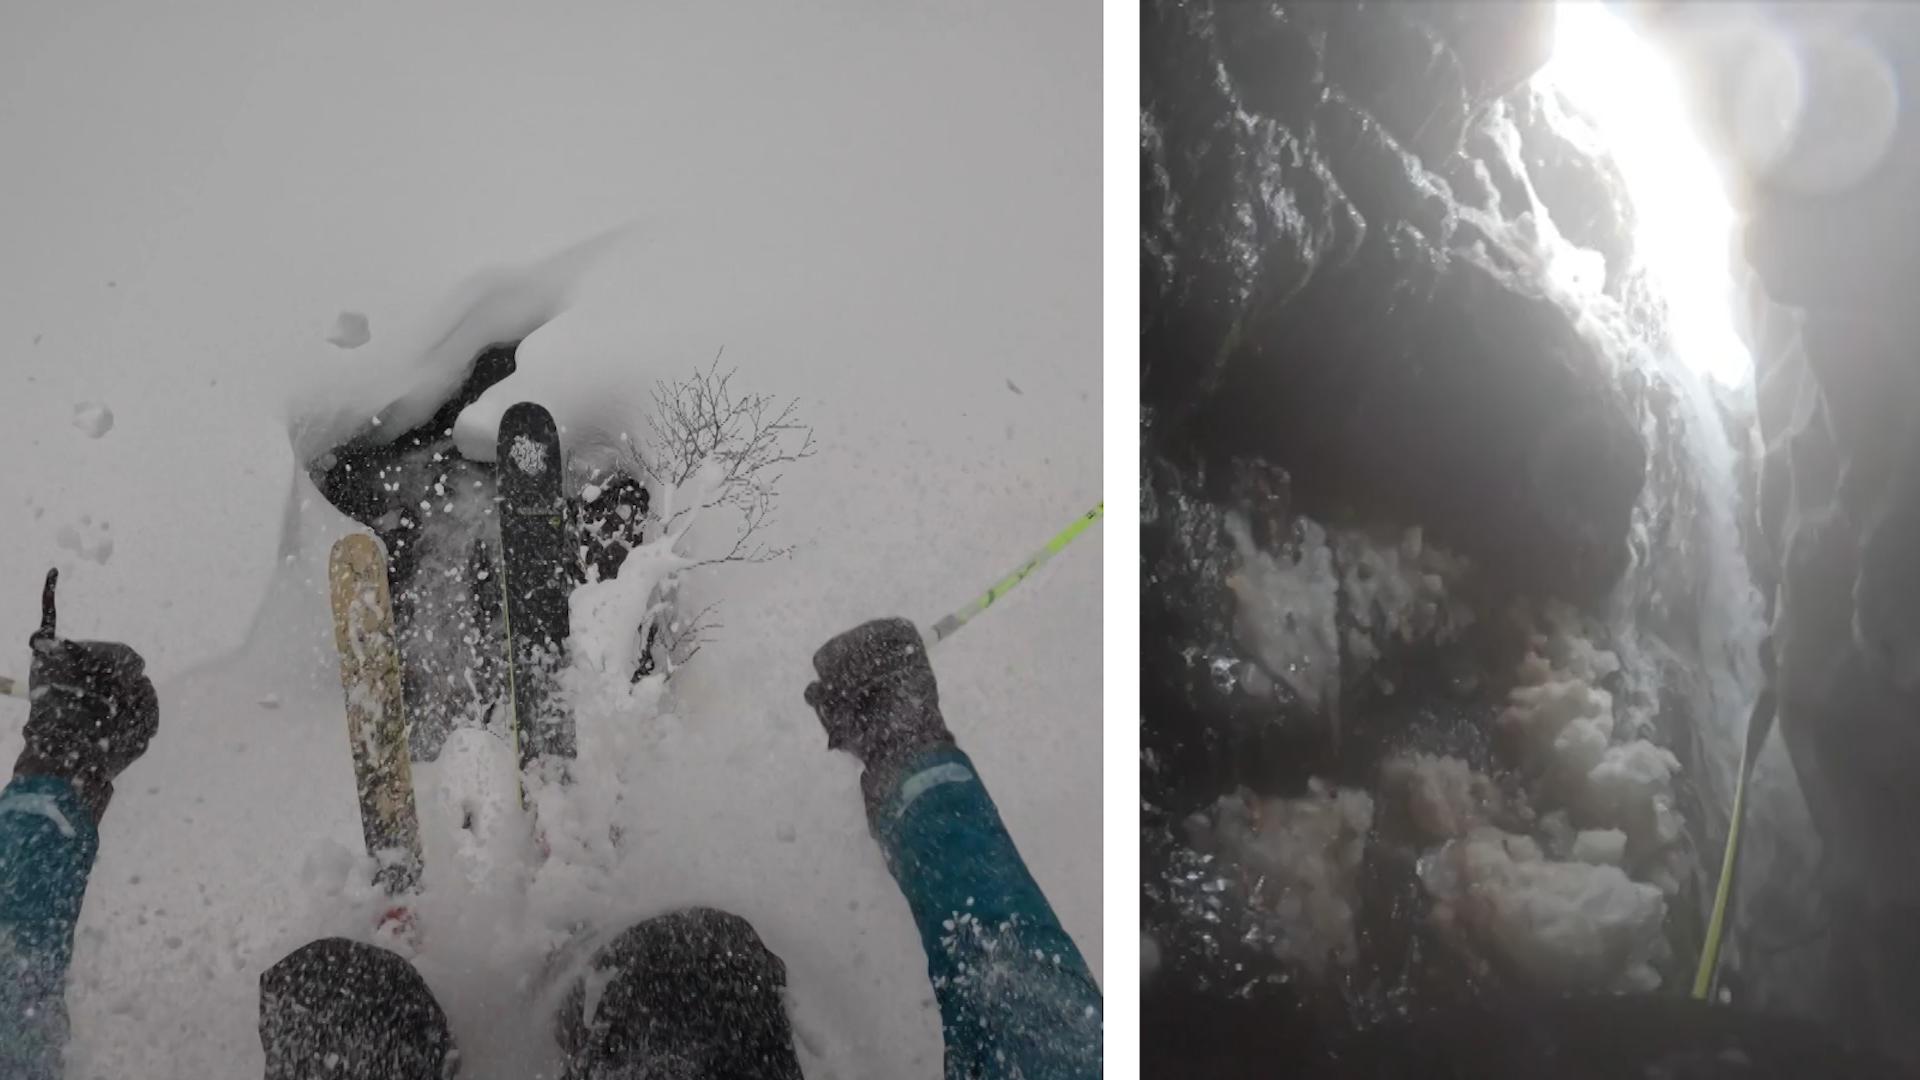 A skier falls into a snow hole - a GoPro camera records everything at five meters in free fall!